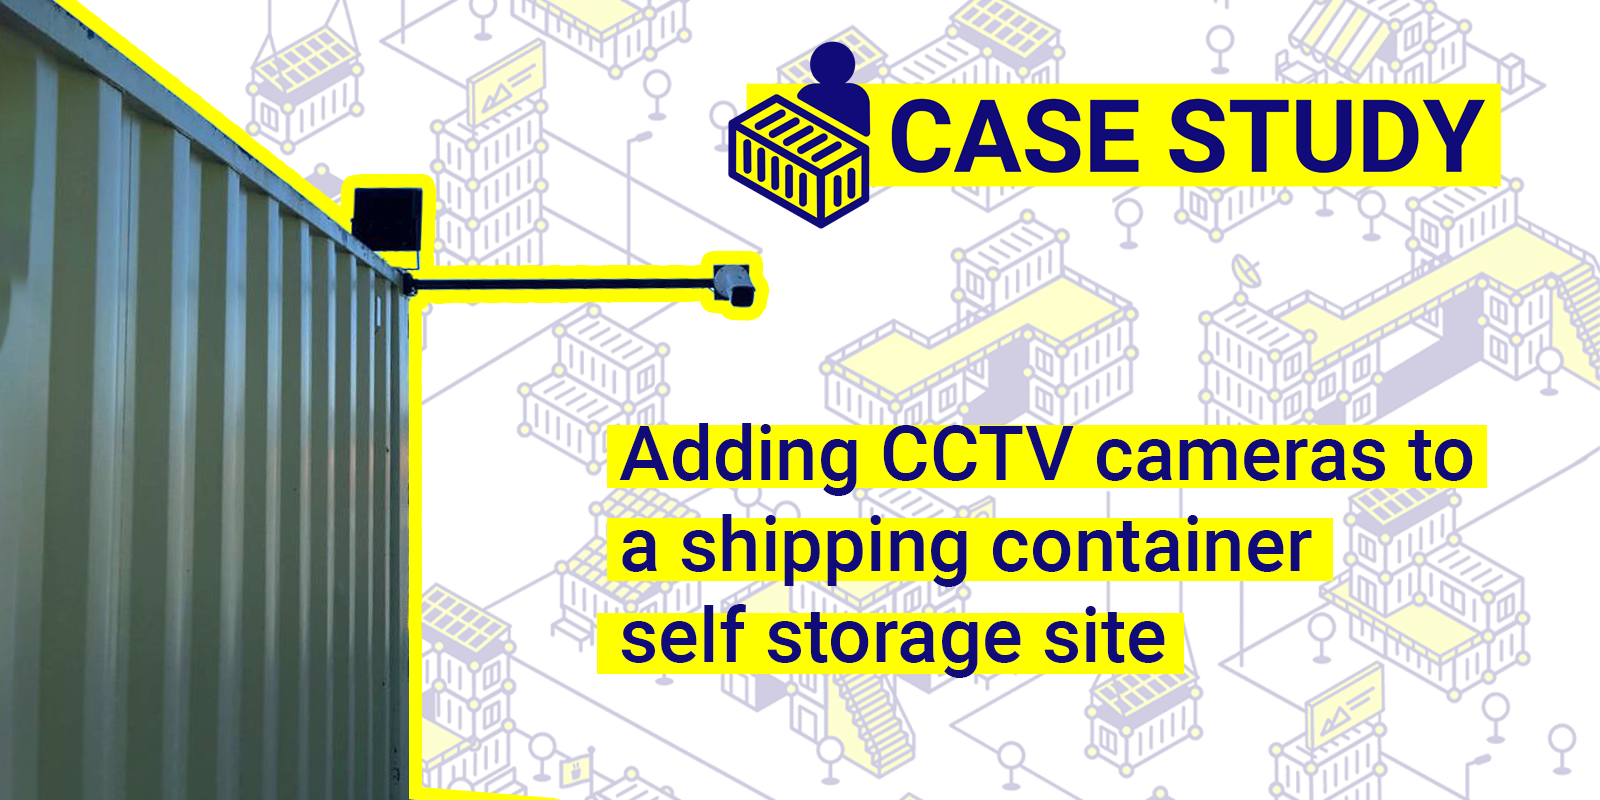 Adding CCTV cameras  to a shipping container self storage site